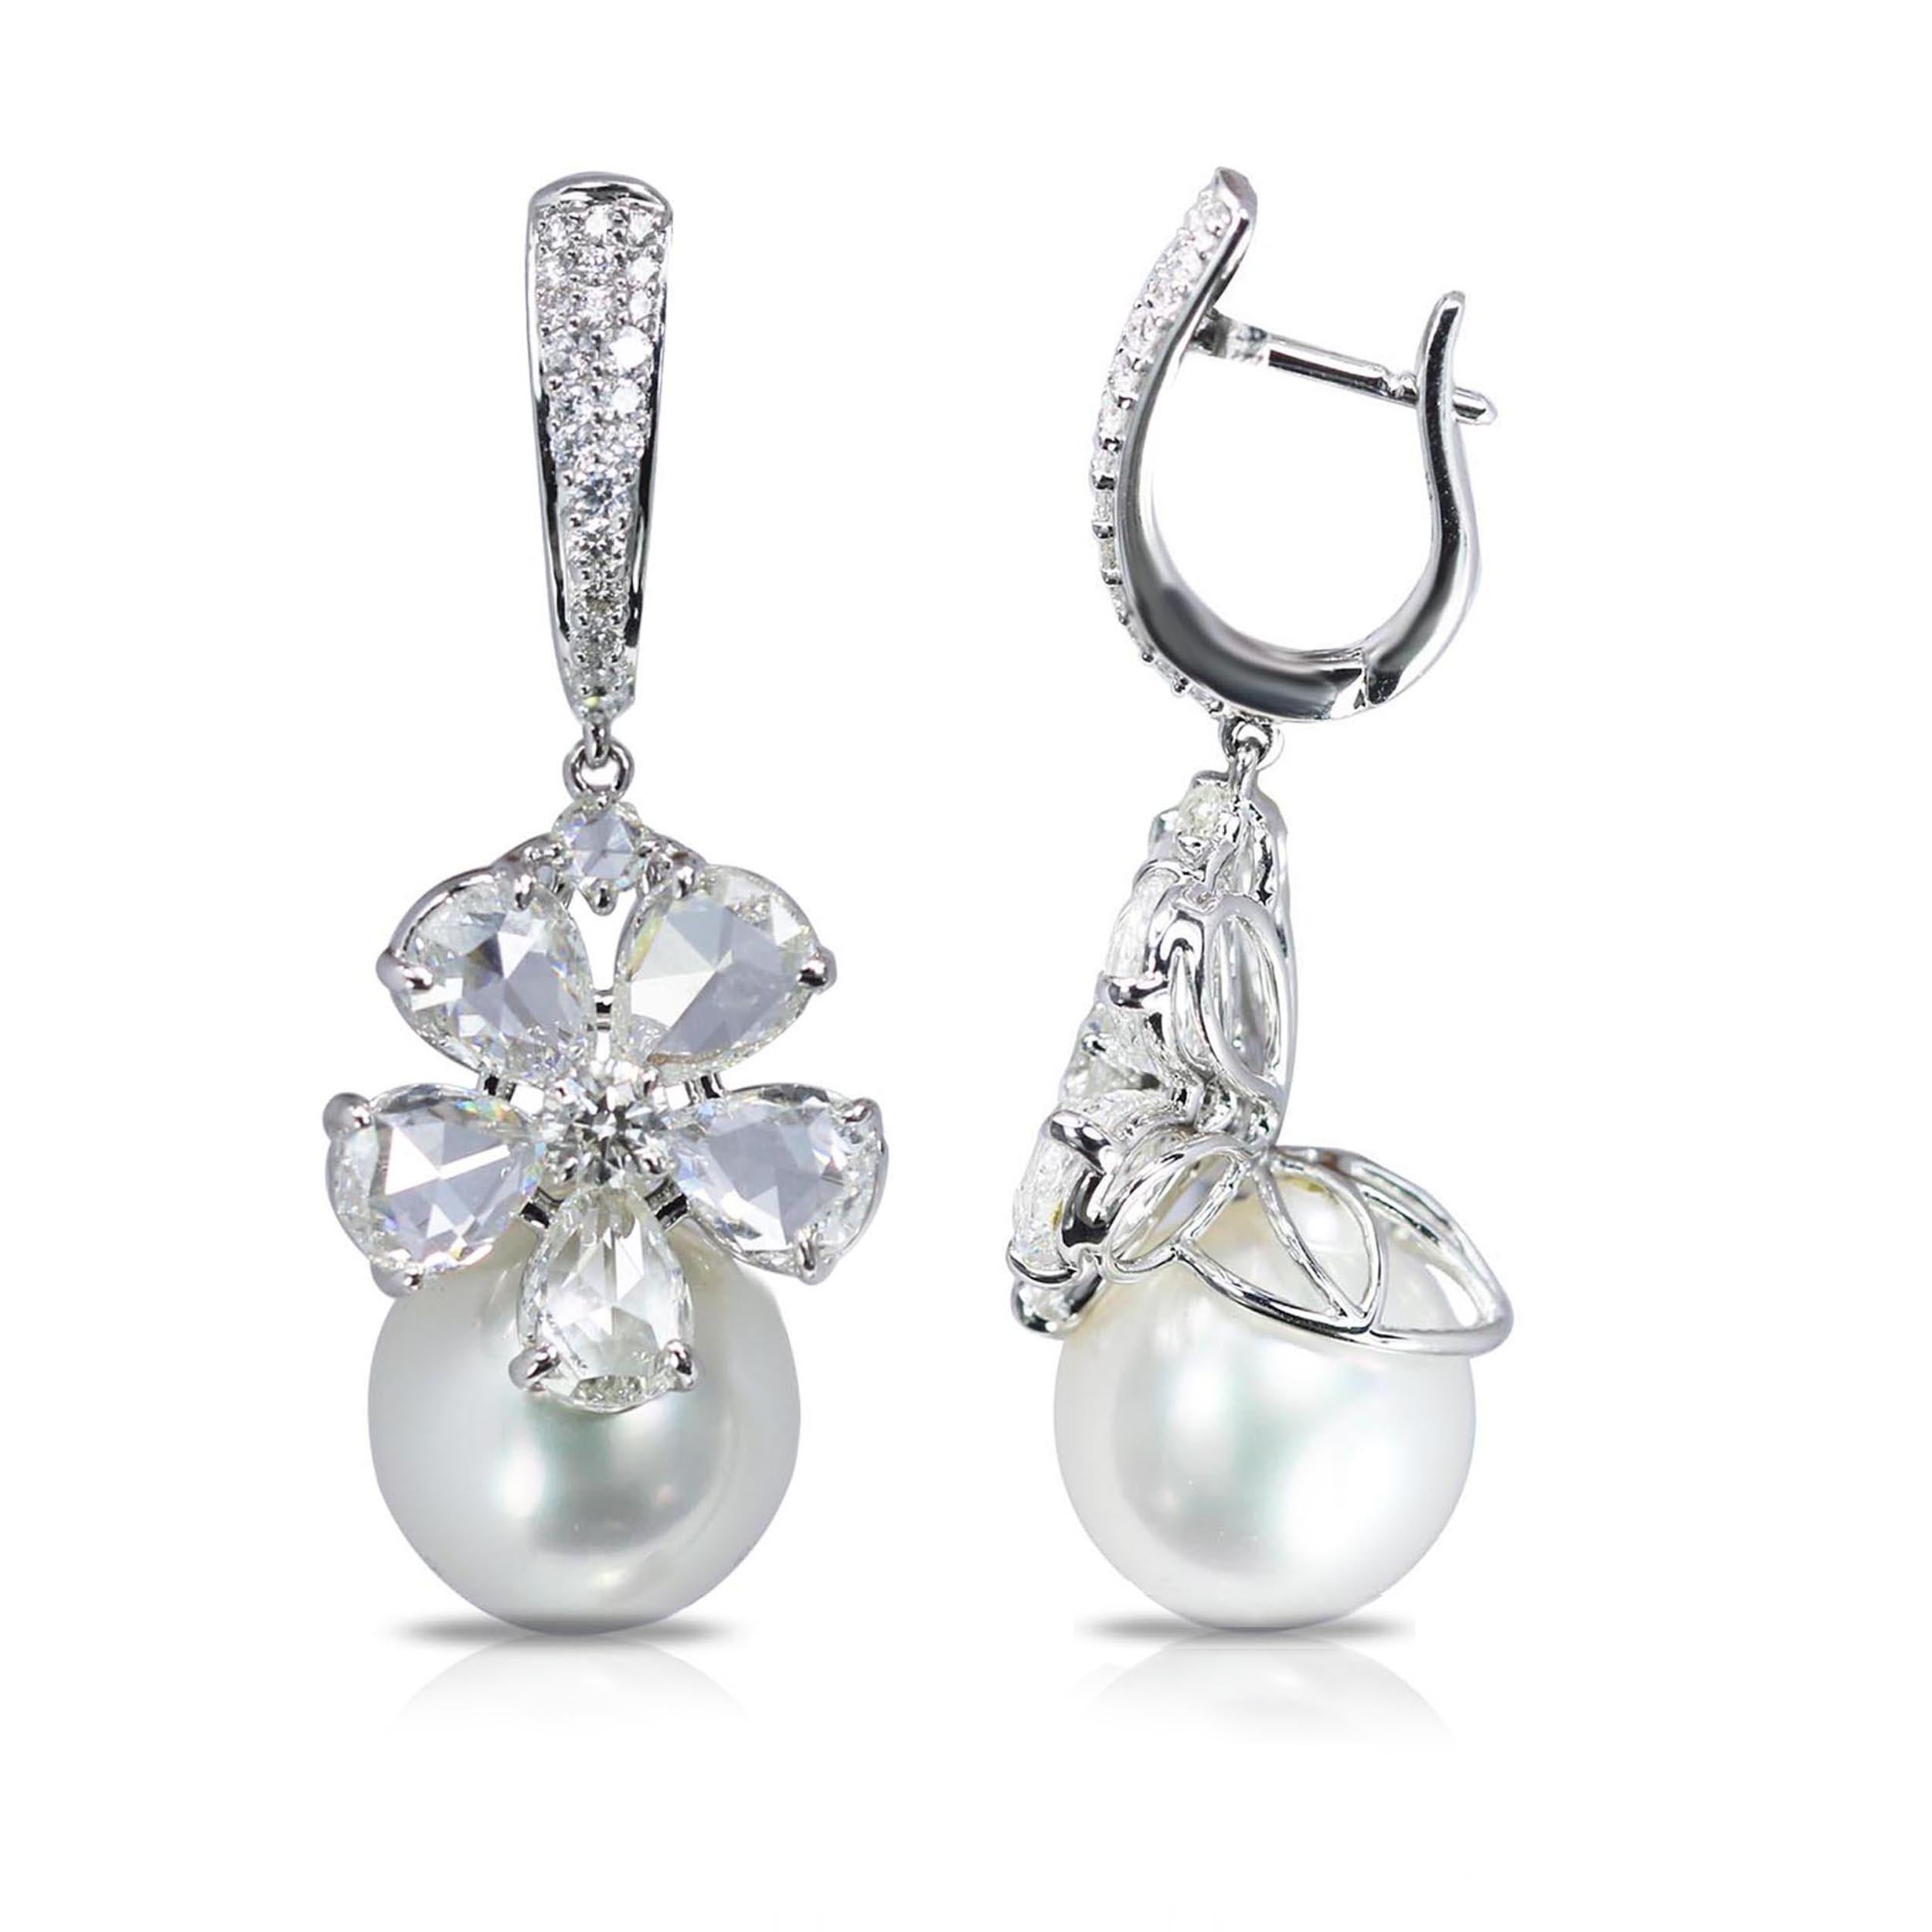 G-H/ VS-SI brilliant cut and rosecut diamonds and south sea pearl earring

This 18K white gold pair of drop earrings crafted in G-H color VS-SI brilliant cut and rosecut diamonds champions the ‘less is more’ aesthetic. Giving the classic floral